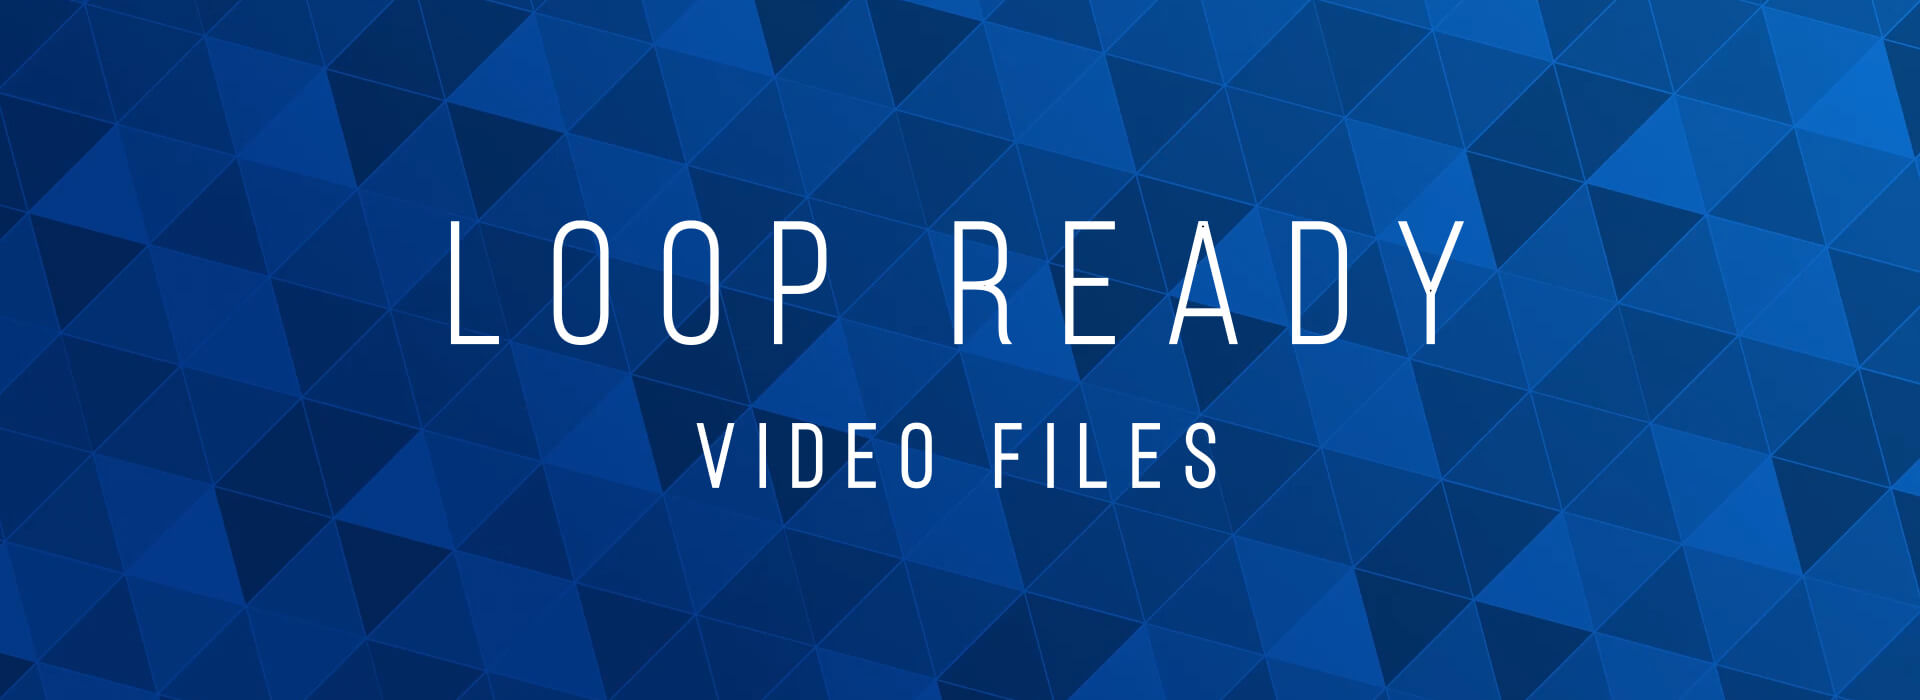 Loop ready animated video backgrounds patterns